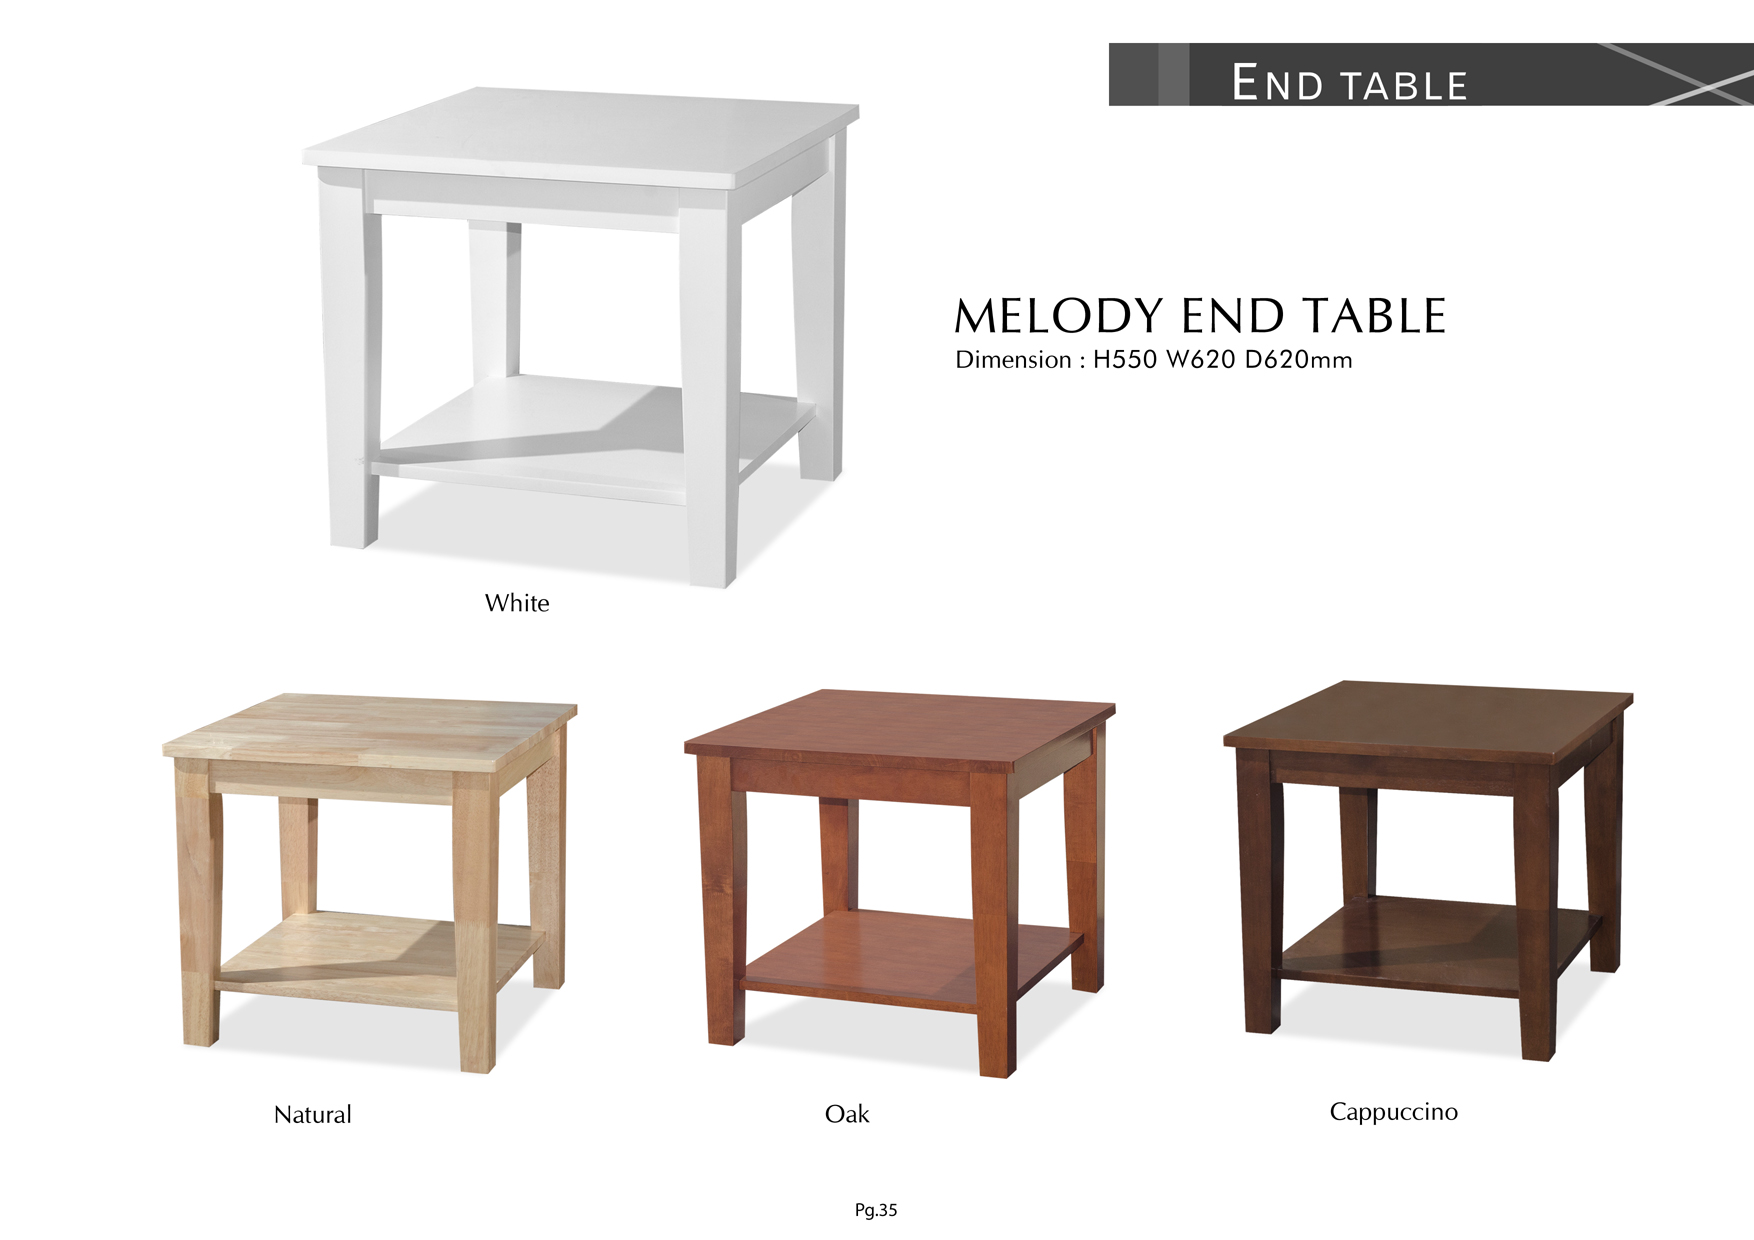 Product: PG35. MELODY END TABLE